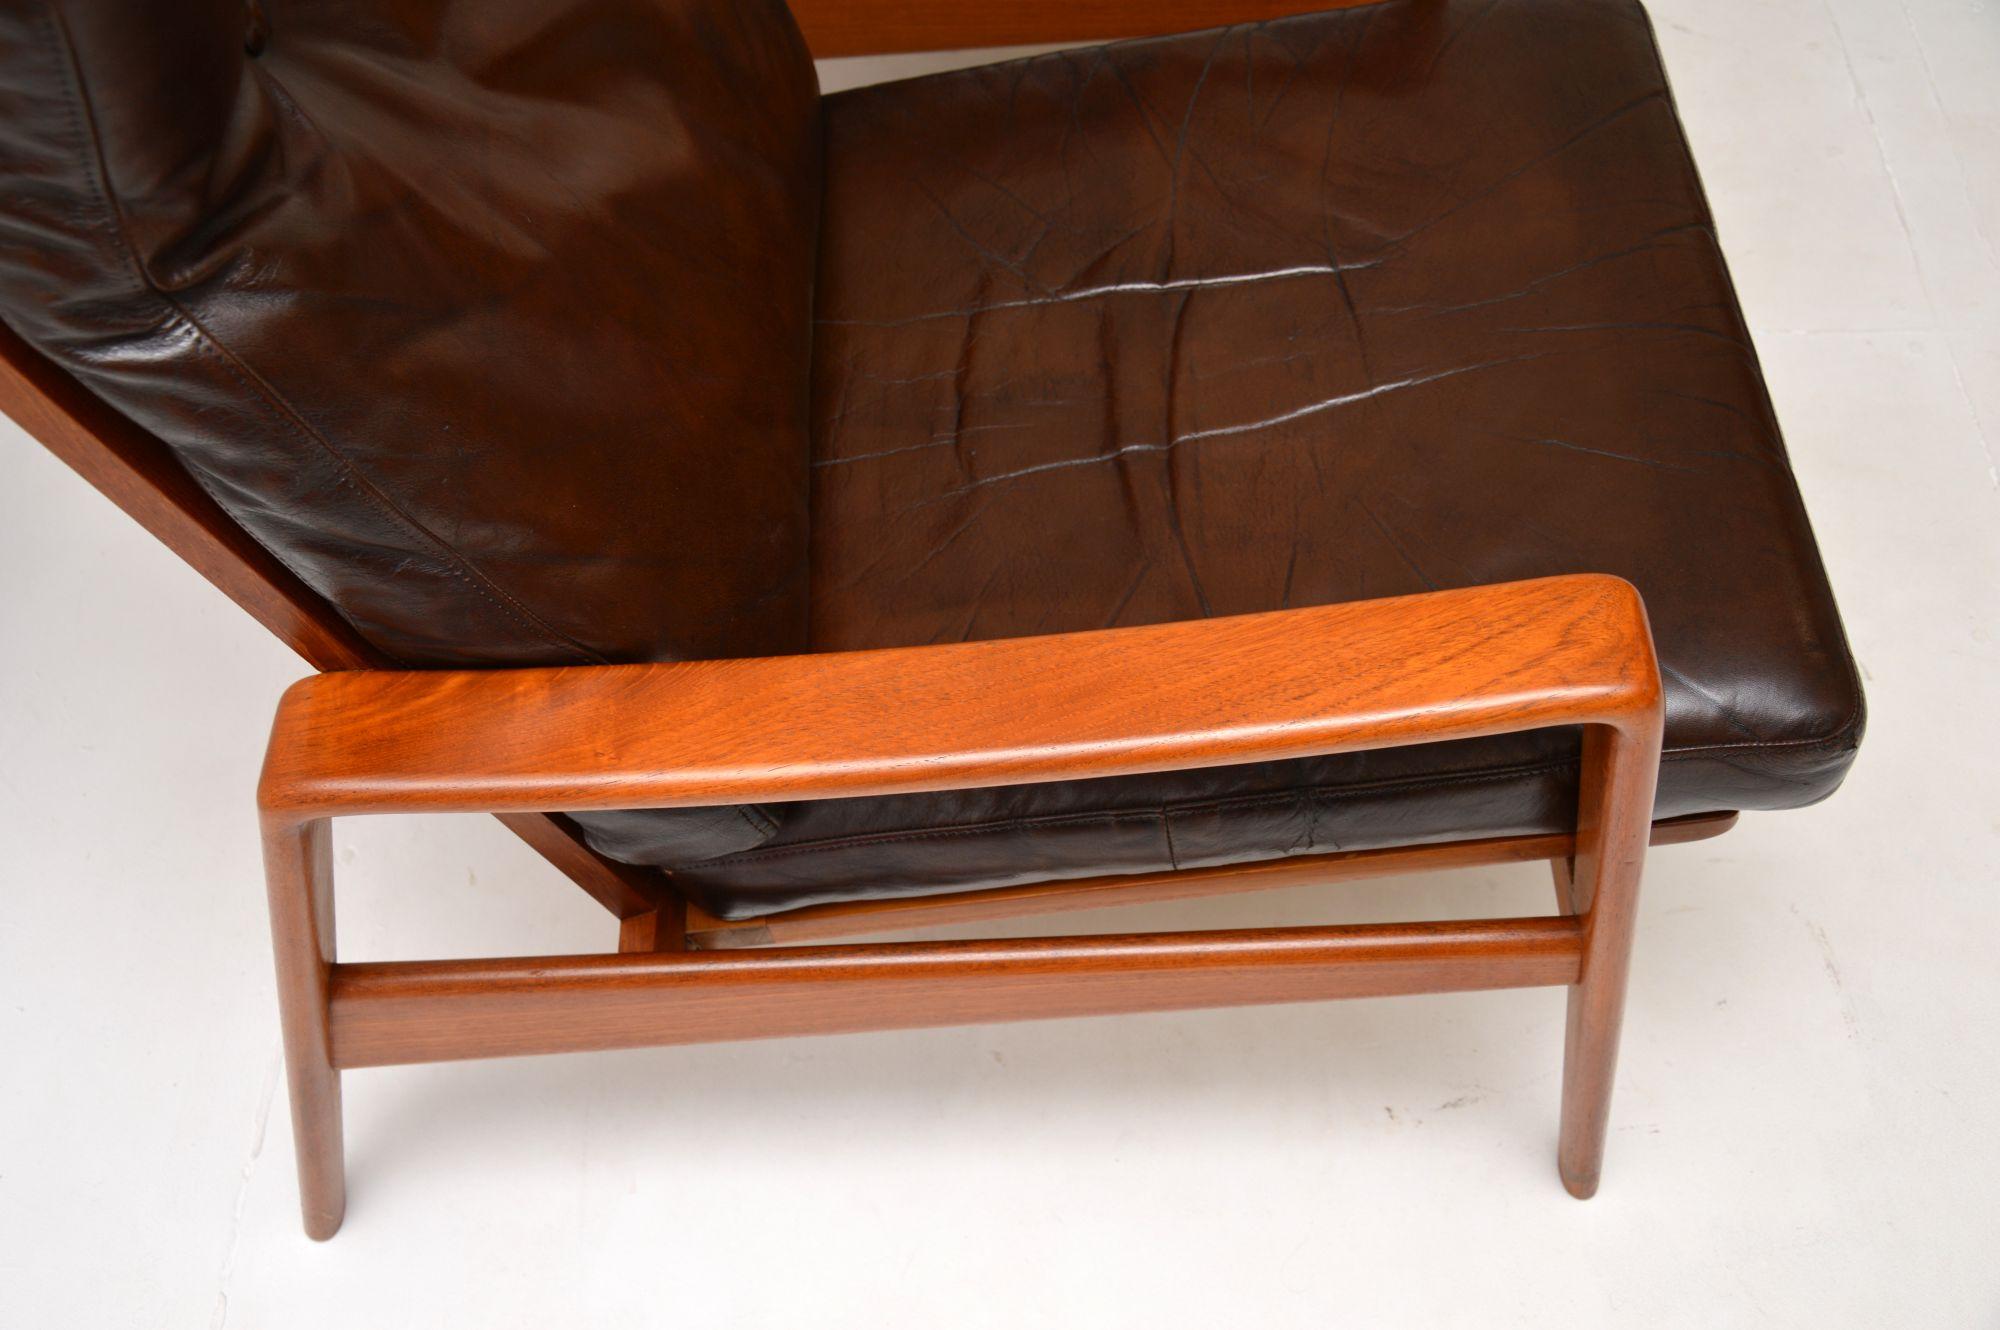 Pair of Danish Vintage Teak and Leather Armchairs by Arne Wahl Iversen For Sale 5